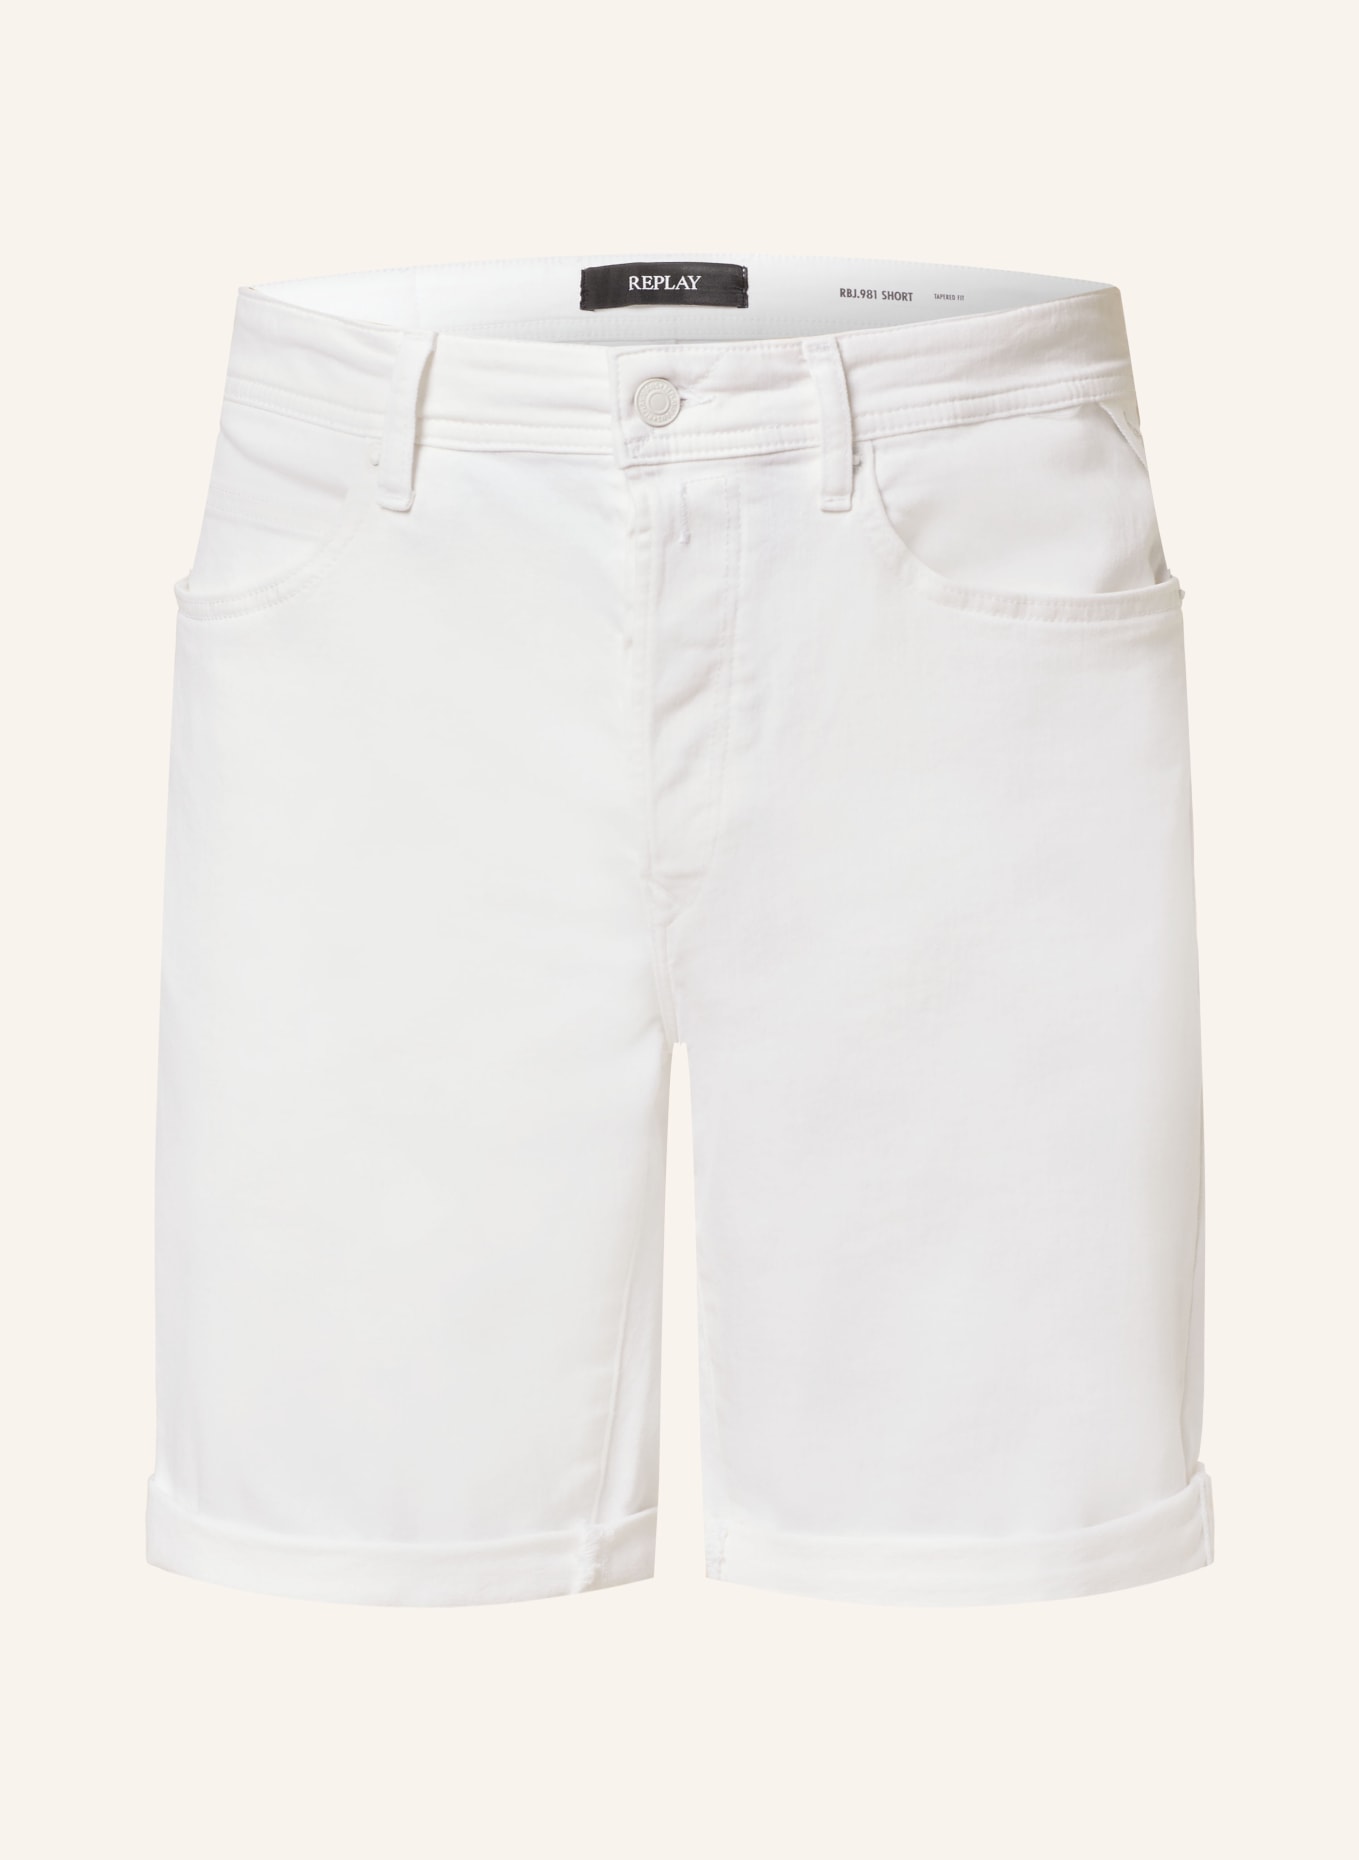 REPLAY Jeansshorts Tapered Fit, Farbe: WEISS (Bild 1)